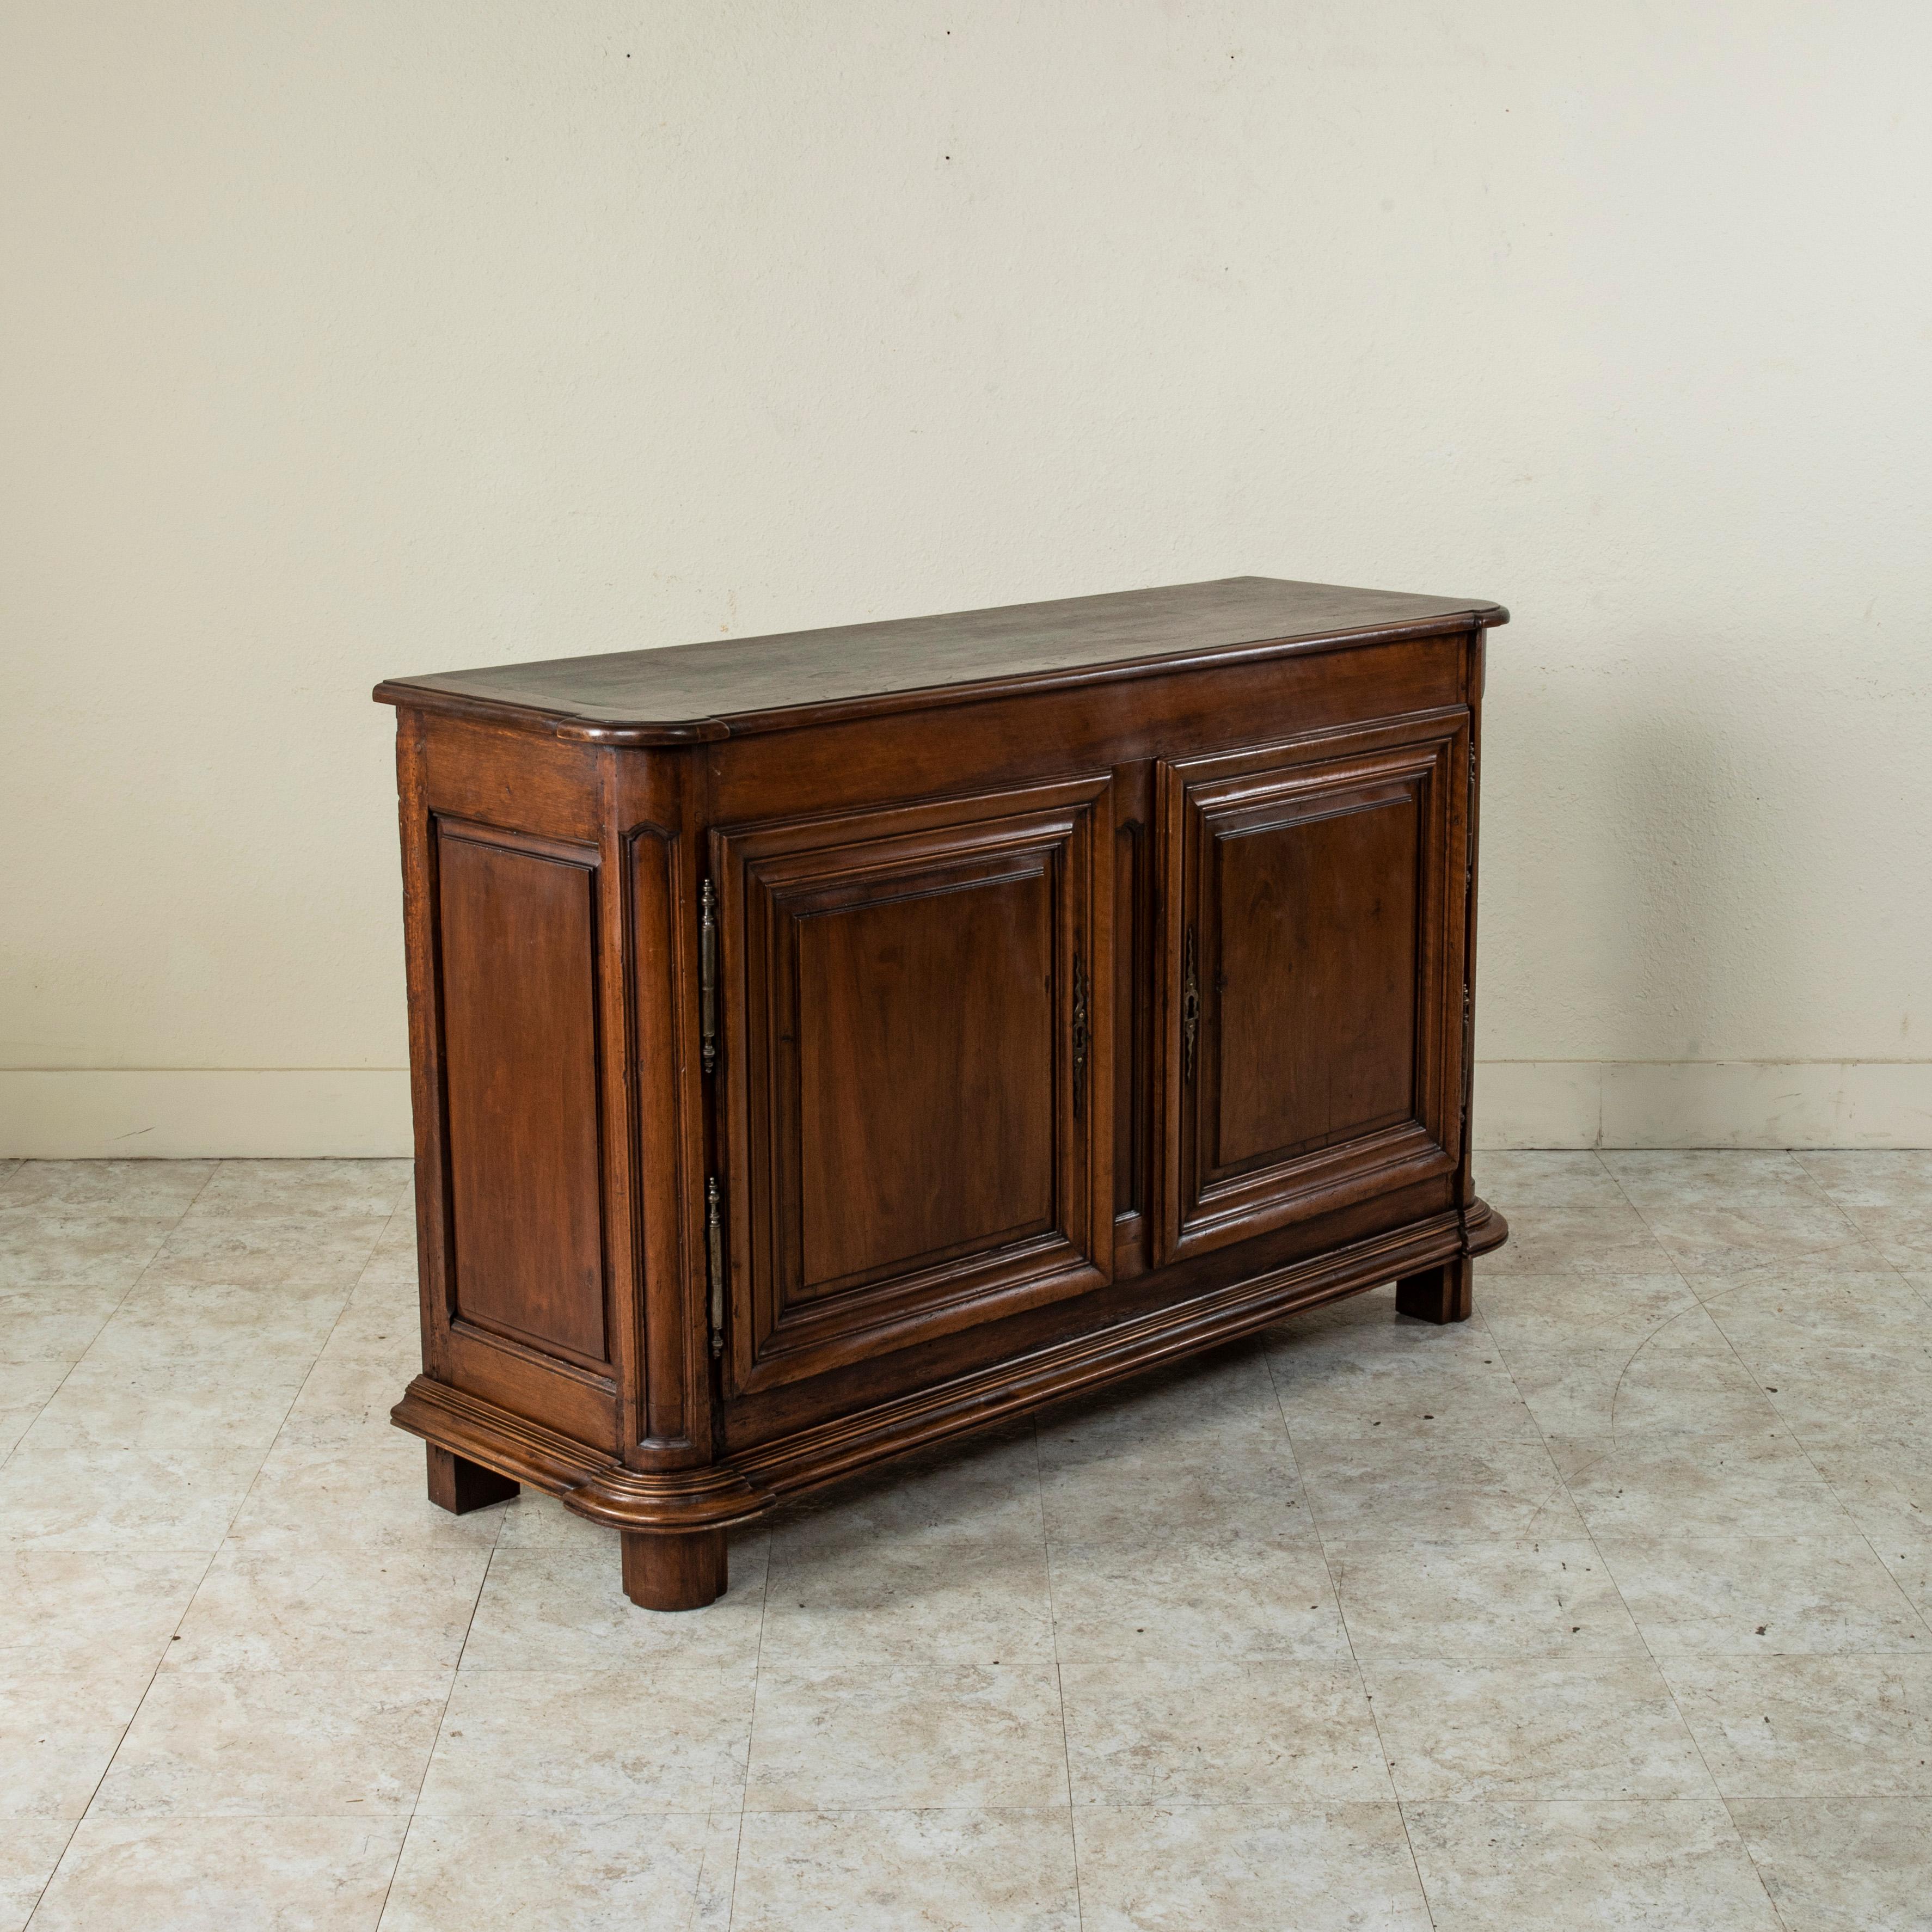 This late 18th century French walnut buffet or sideboard features hand pegged paneled sides and and a beveled top. Its two doors are classic Louis XIV designs with symmetrical rectangular panels. The doors open to reveal a single interior shelf that